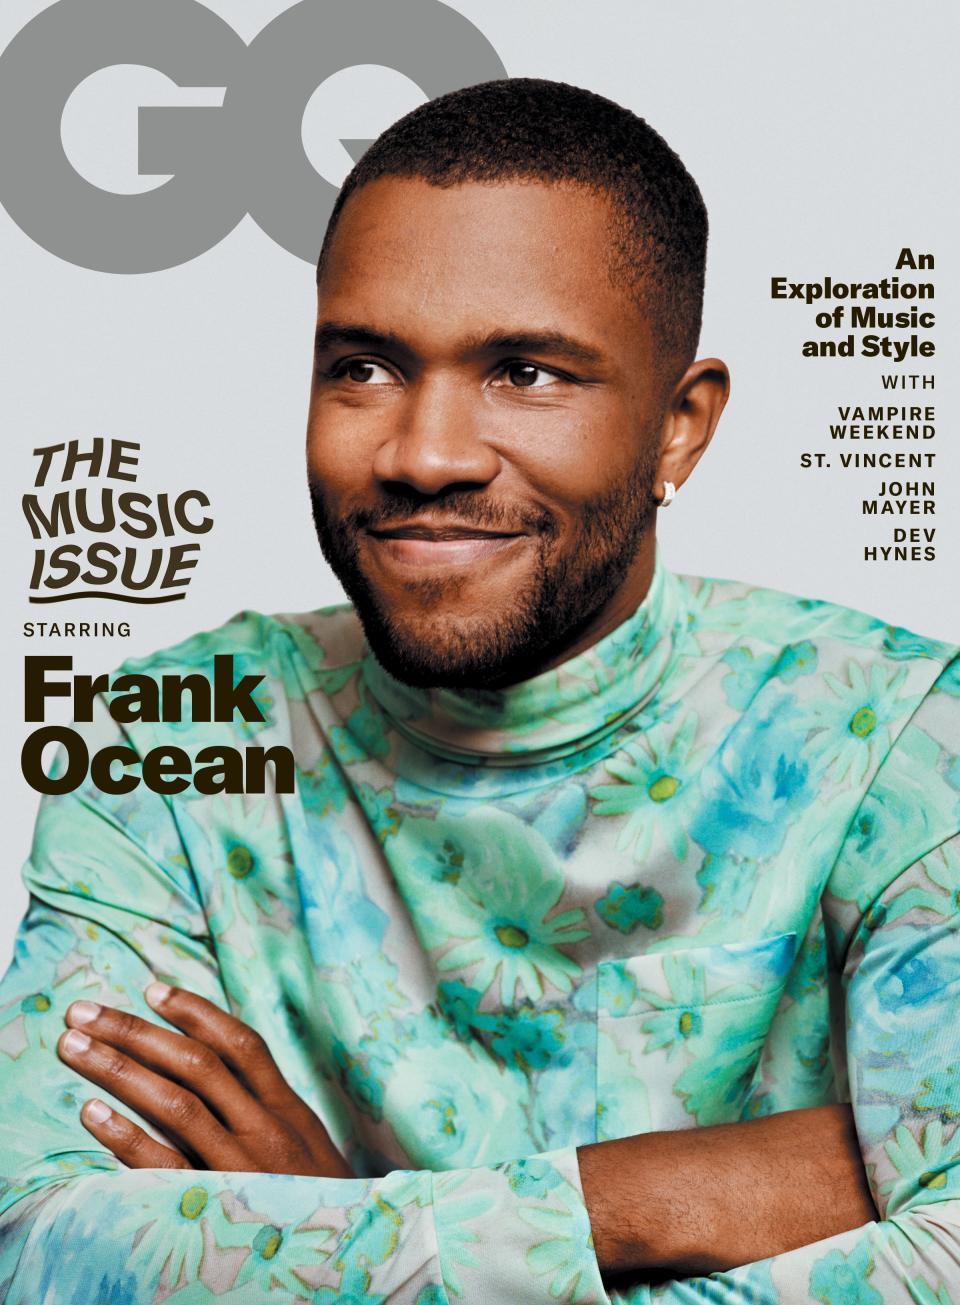 Your coffee table could use some style. Click here to subscribe to GQ.